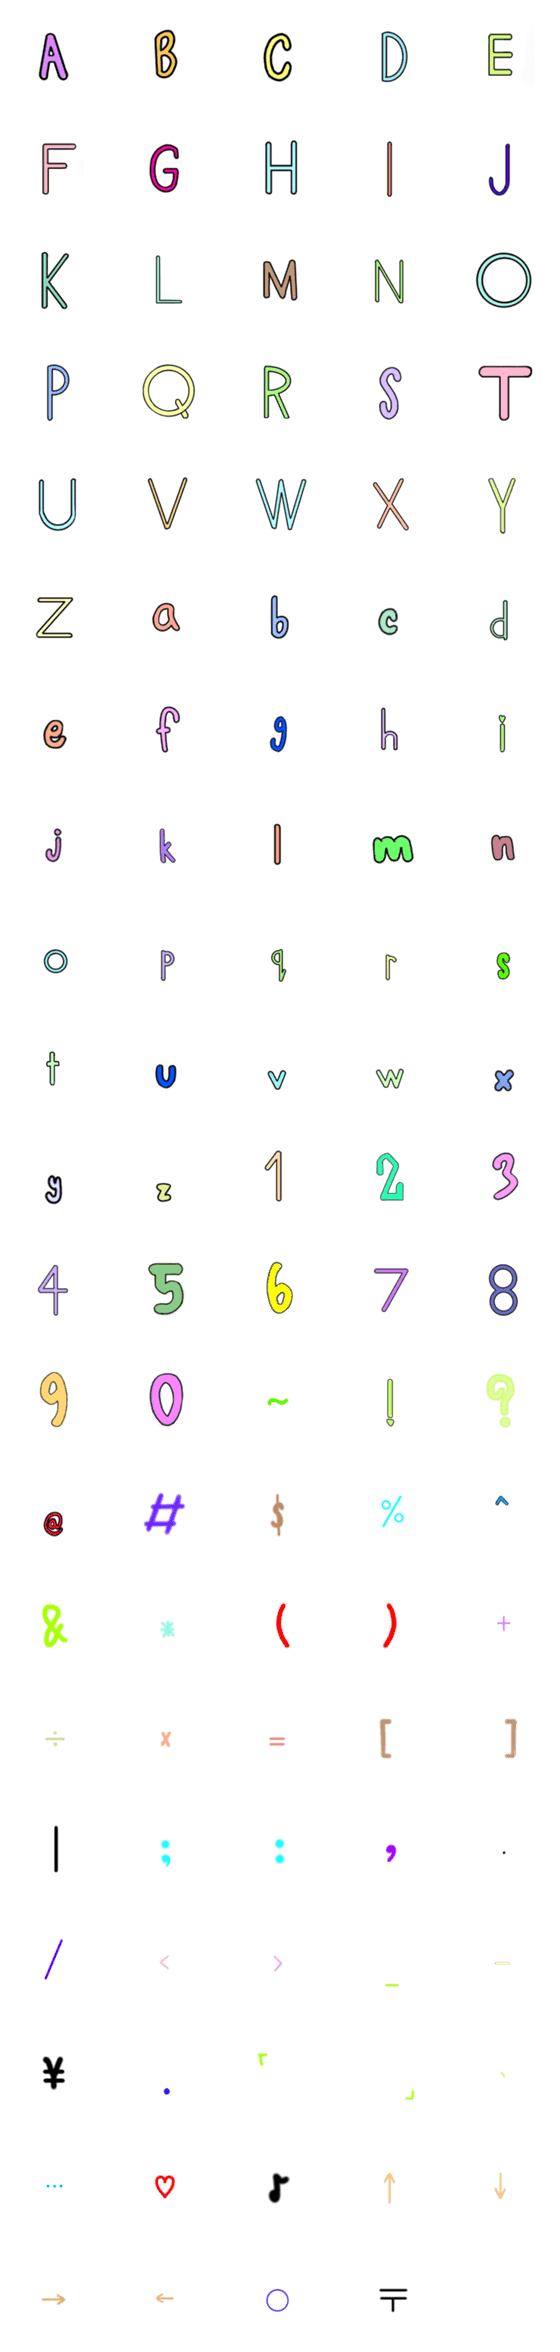 [LINE絵文字]Letters numbers V.1の画像一覧